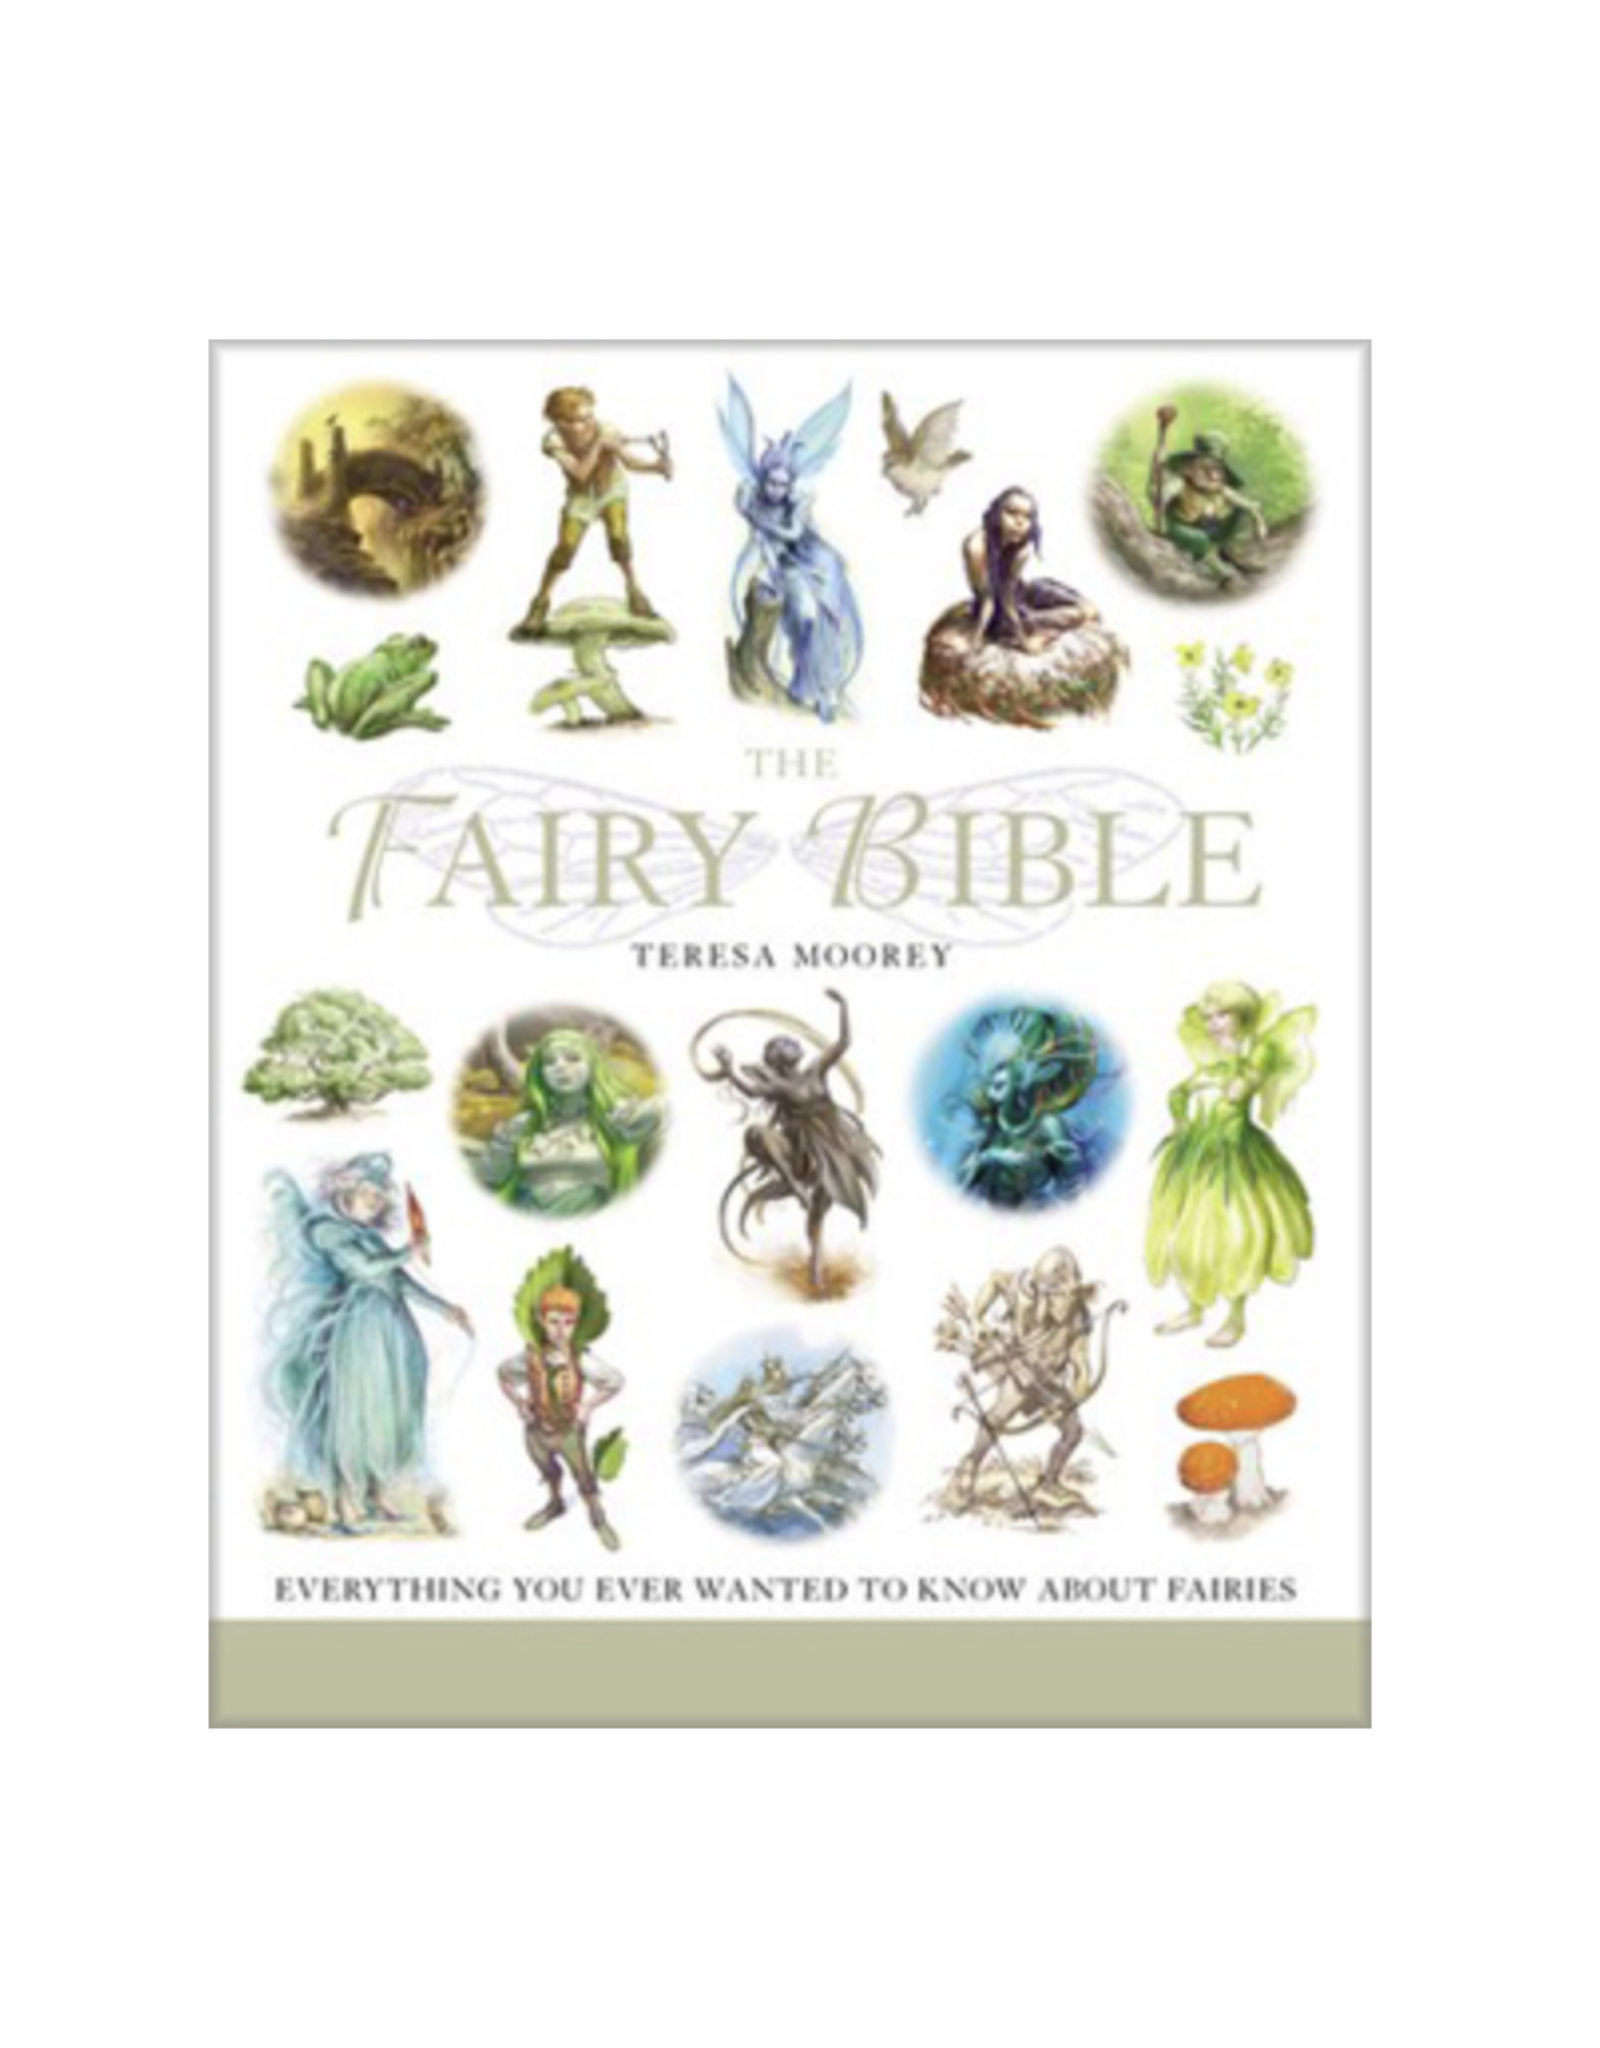 Fairy Bible - Everything You Ever Wanted to Know About Fairies